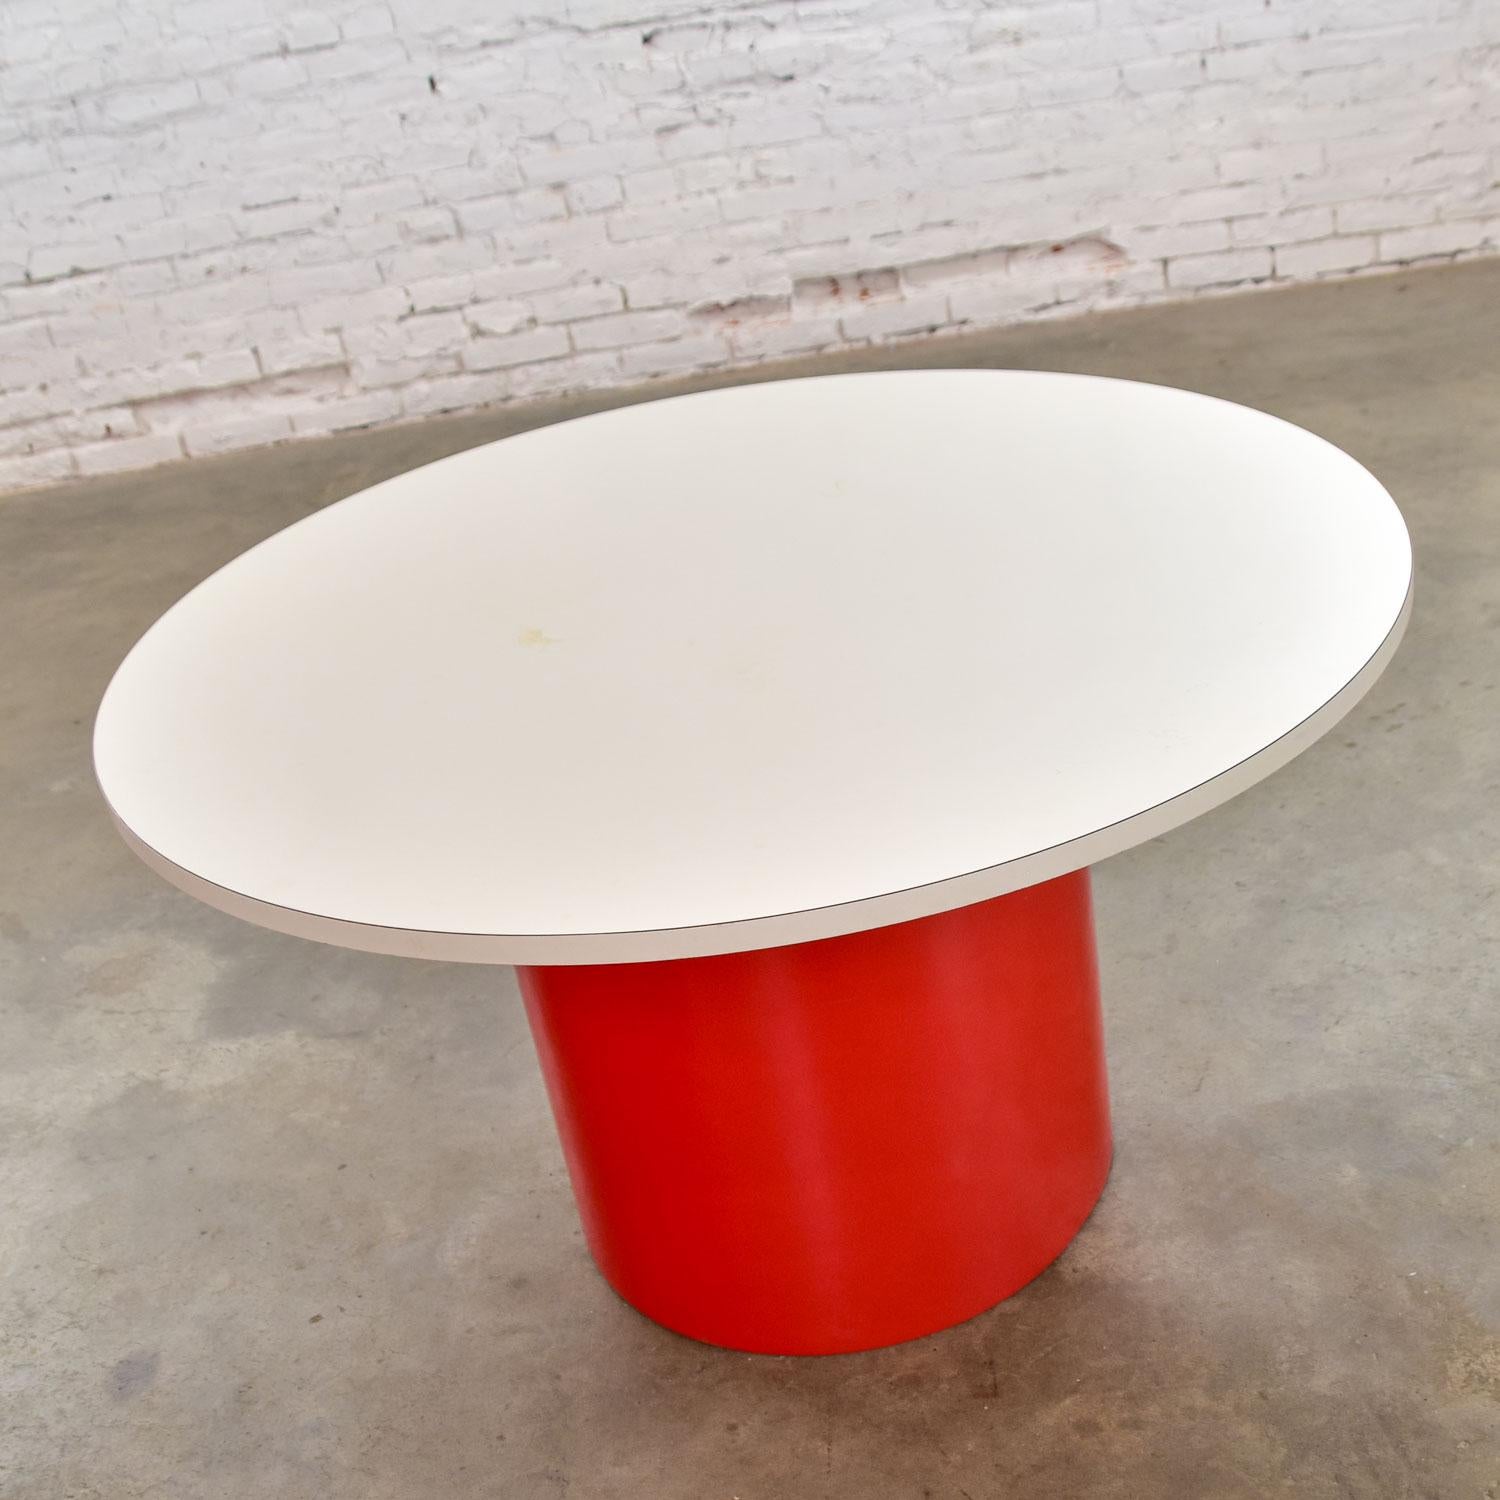 Faux Leather Mod MCM Table by Milo Baughman & TC & 2 Chairs by Founders Furniture Red & White